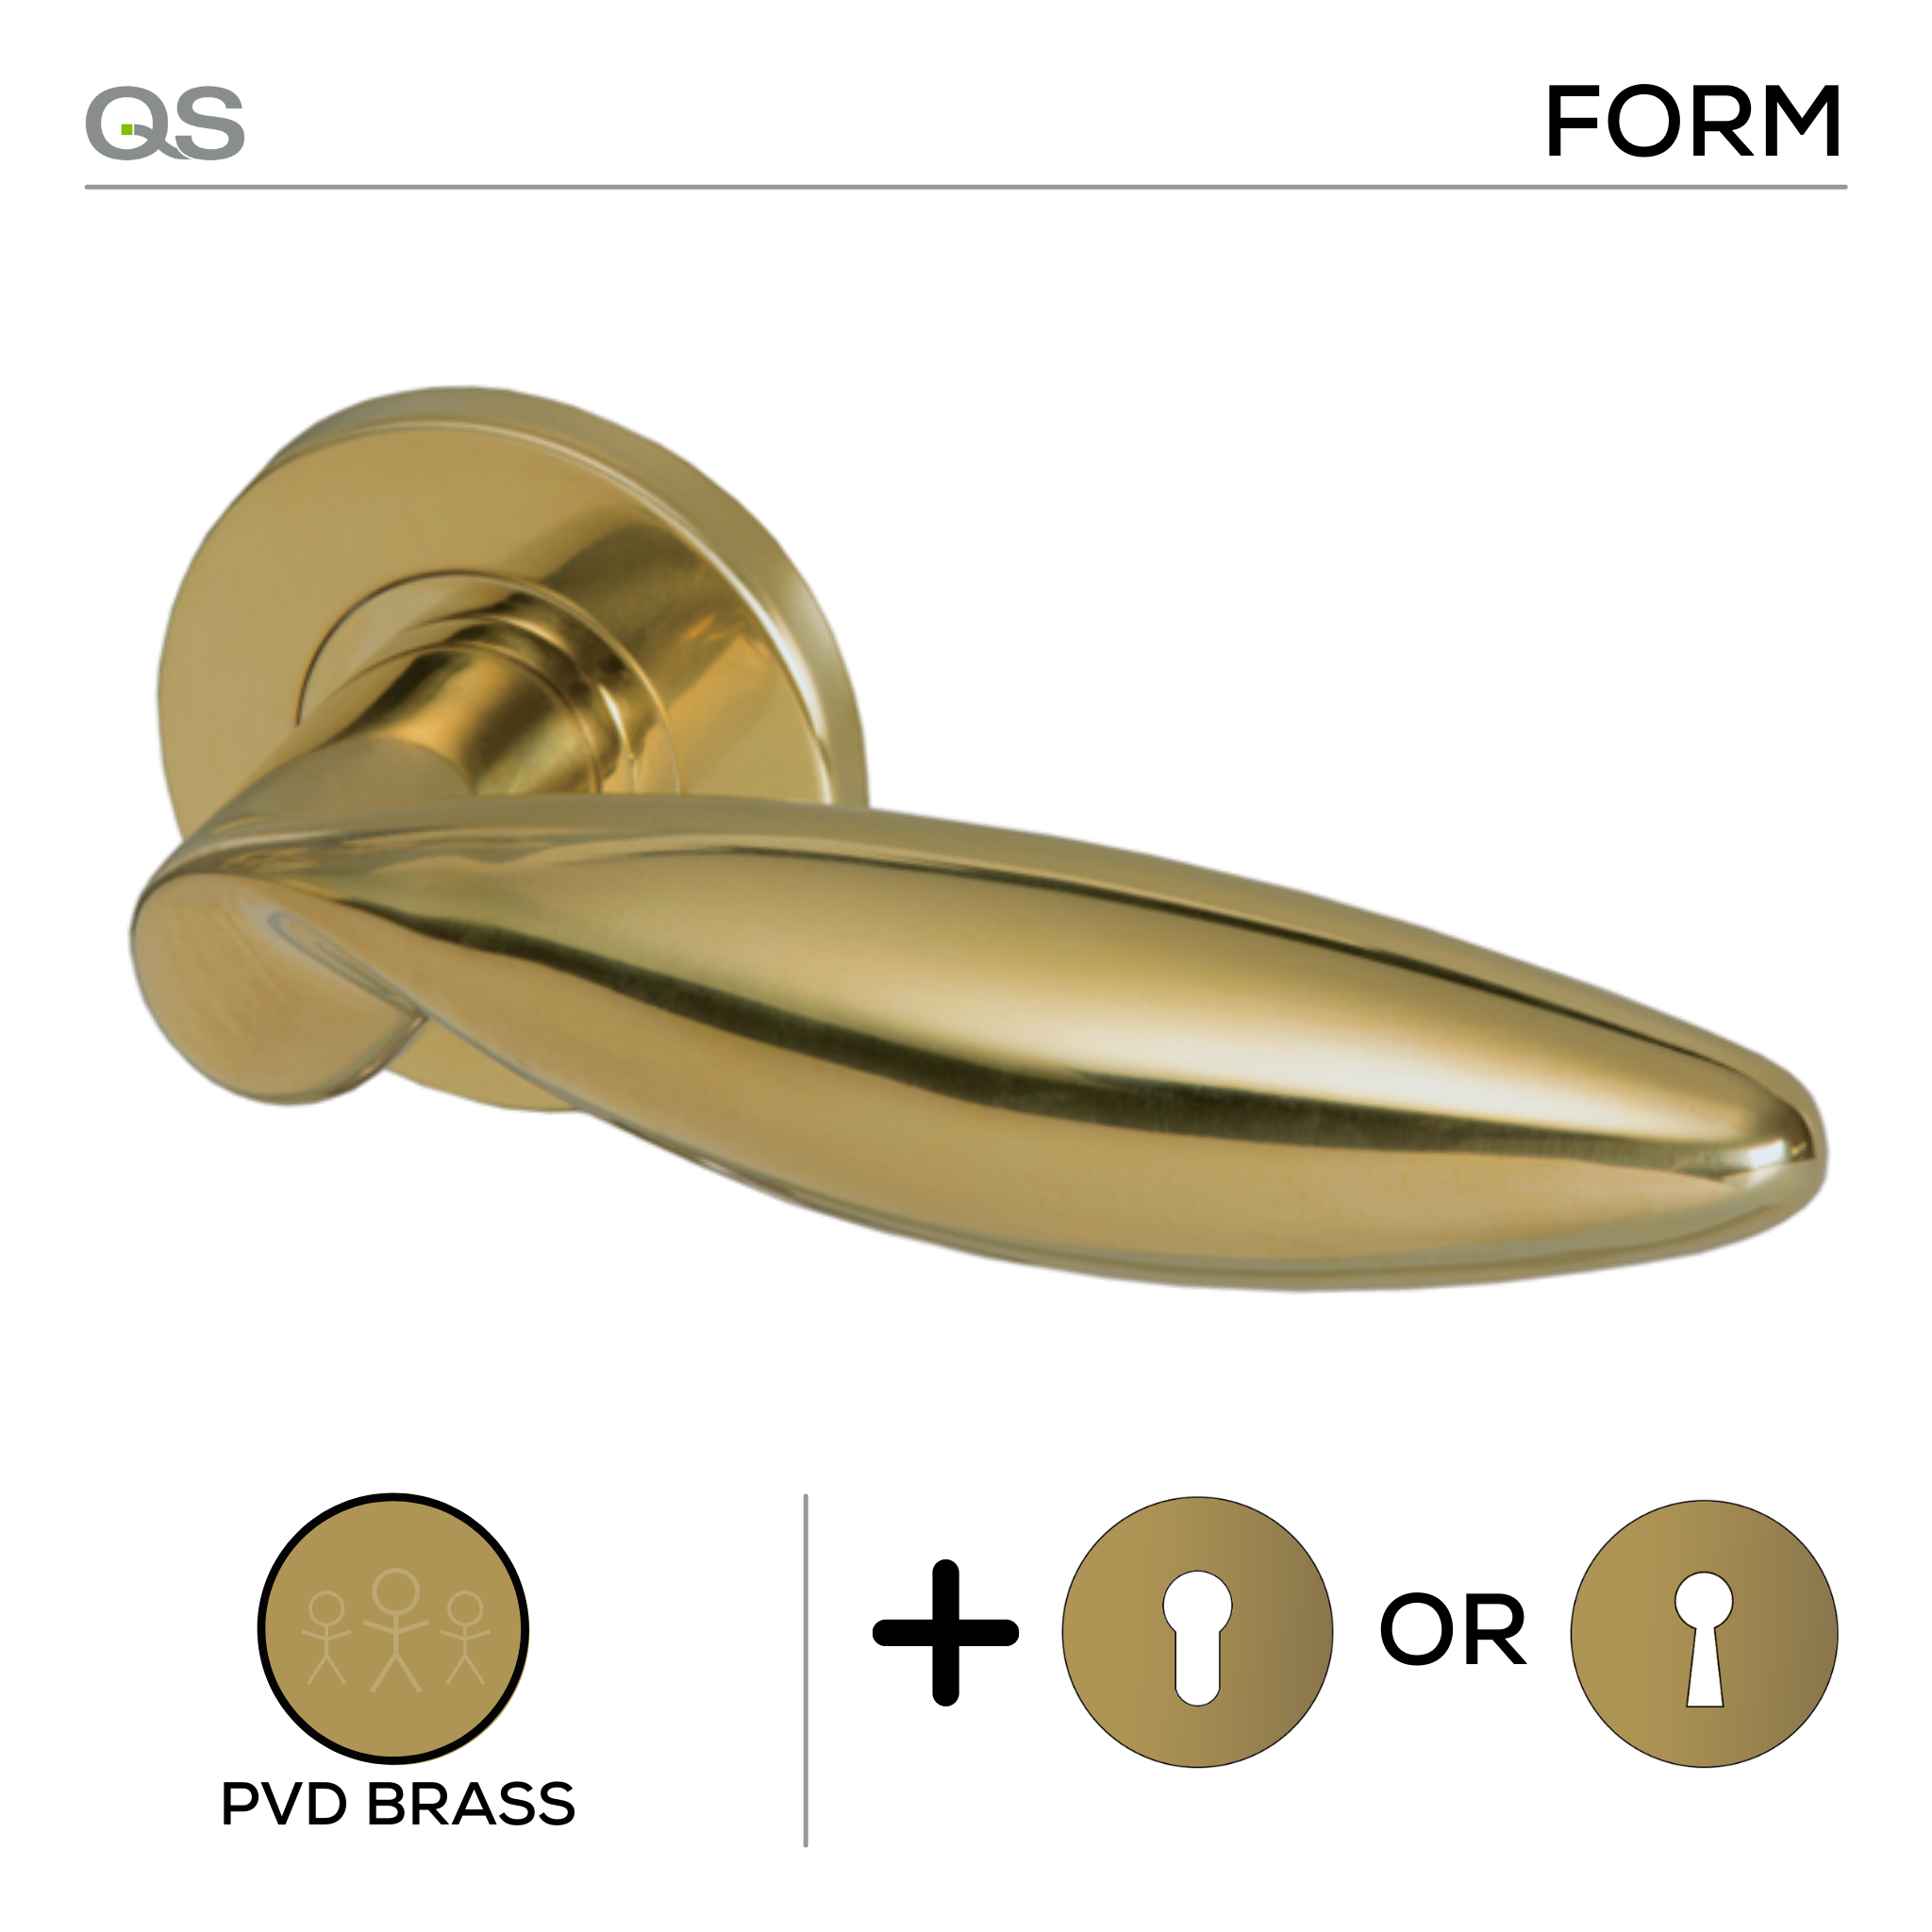 Boras PVD, Lever Handles, Form, On Round Rose, With Escutcheons, PVD Brass, QS